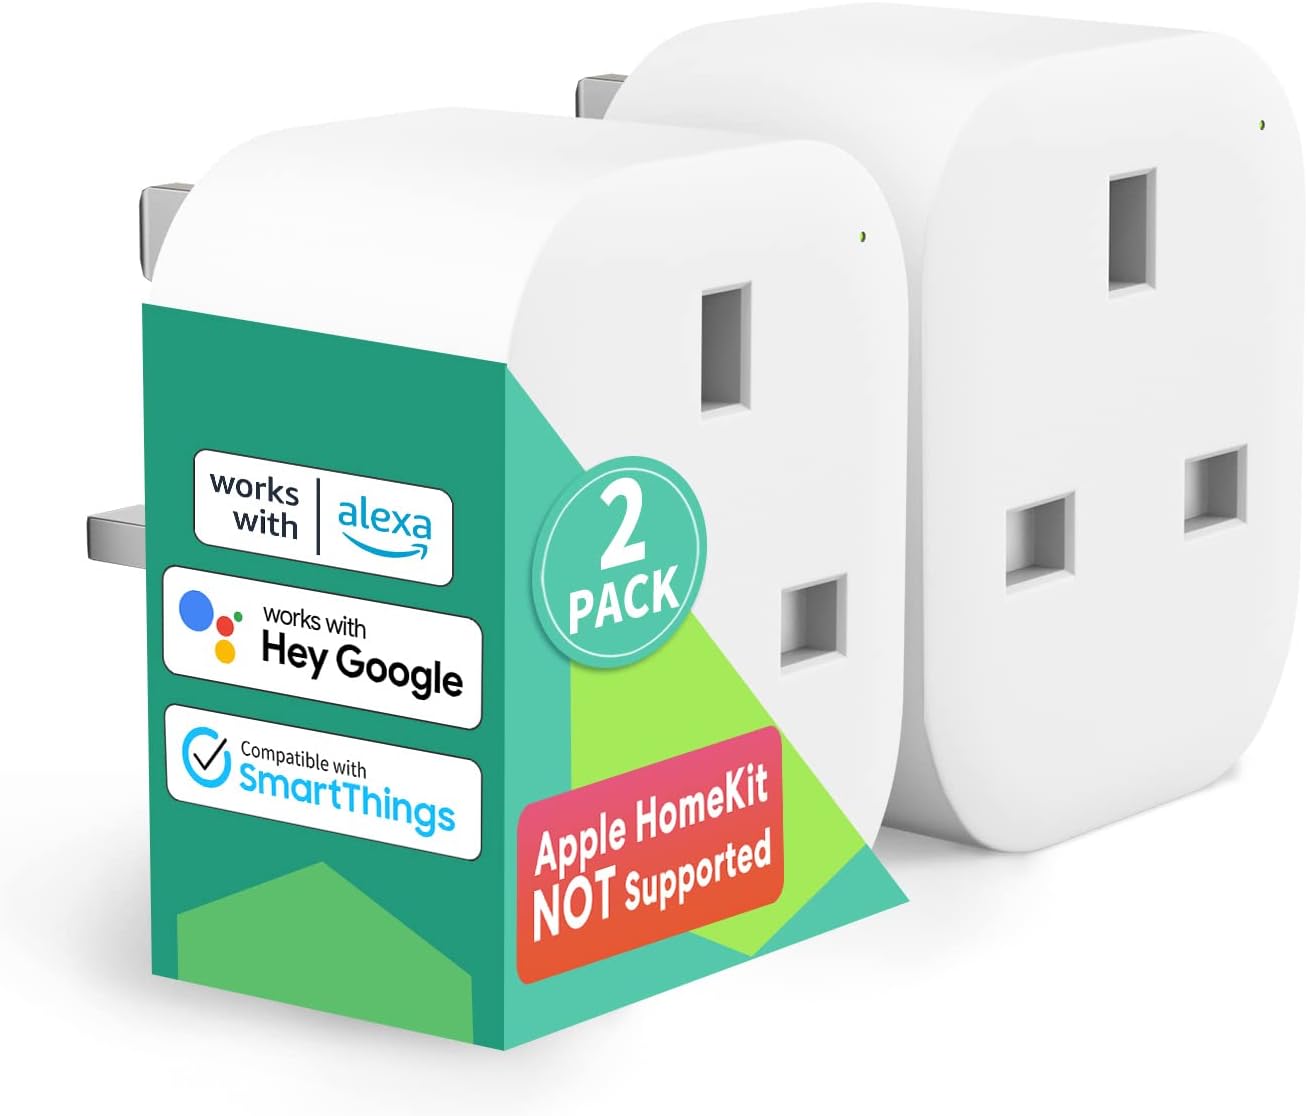 The smart plug uses robust chipsets that make them work better than other Wi-Fi plugs, just like Amazon Echo.